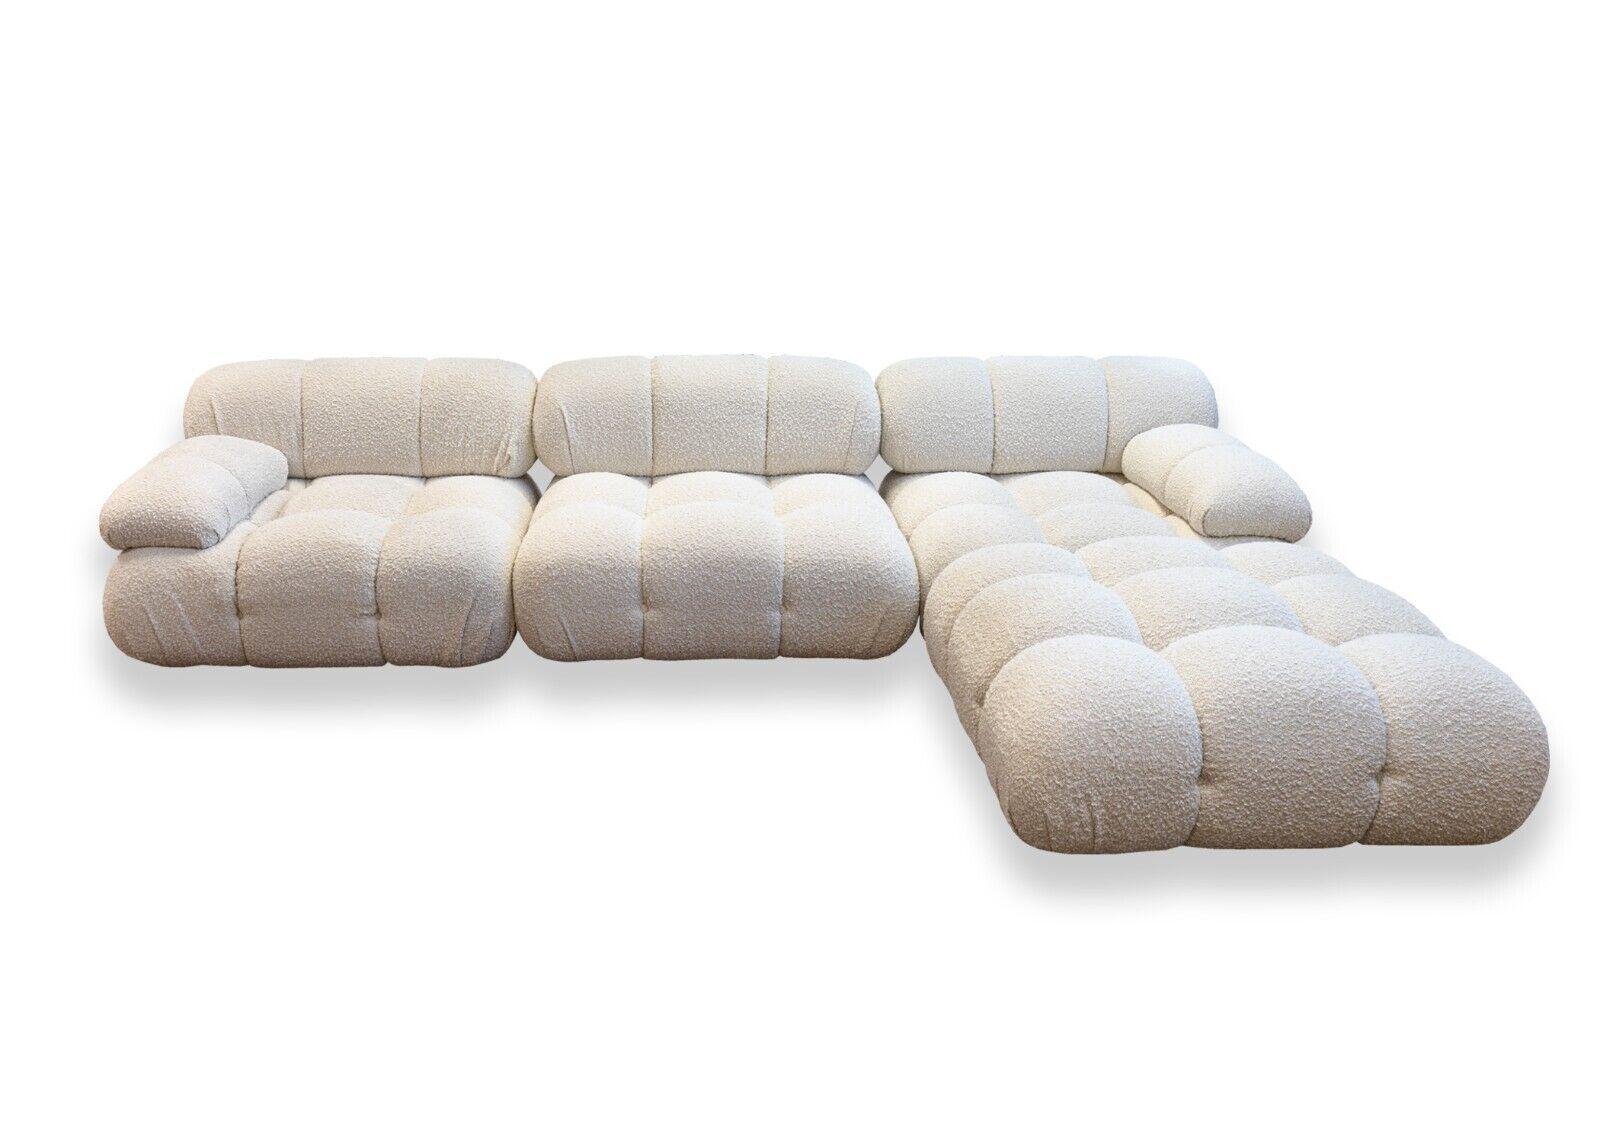 A modern contemporary cream 4 piece Rove Concepts Belia modular sofa sectional. An absolutely stunning sectional from US furniture brand, Rove Concepts. As a part of their Belia collection, this sofa sectional features a wonderfully modular design